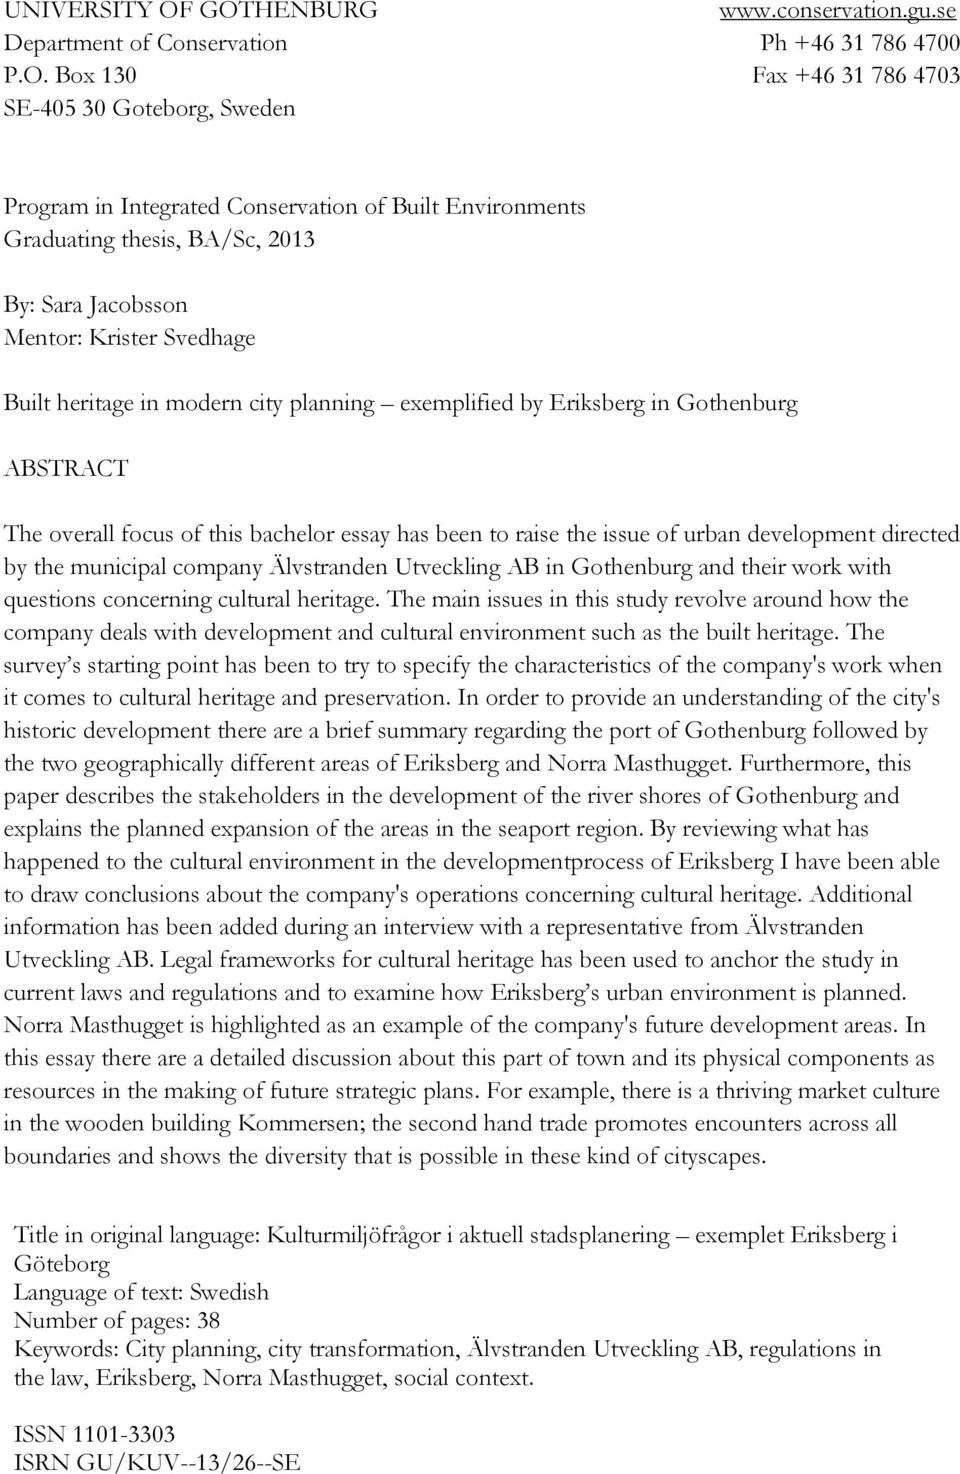 Graduating thesis, BA/Sc, 2013 By: Sara Jacobsson Mentor: Krister Svedhage Built heritage in modern city planning exemplified by Eriksberg in Gothenburg ABSTRACT The overall focus of this bachelor